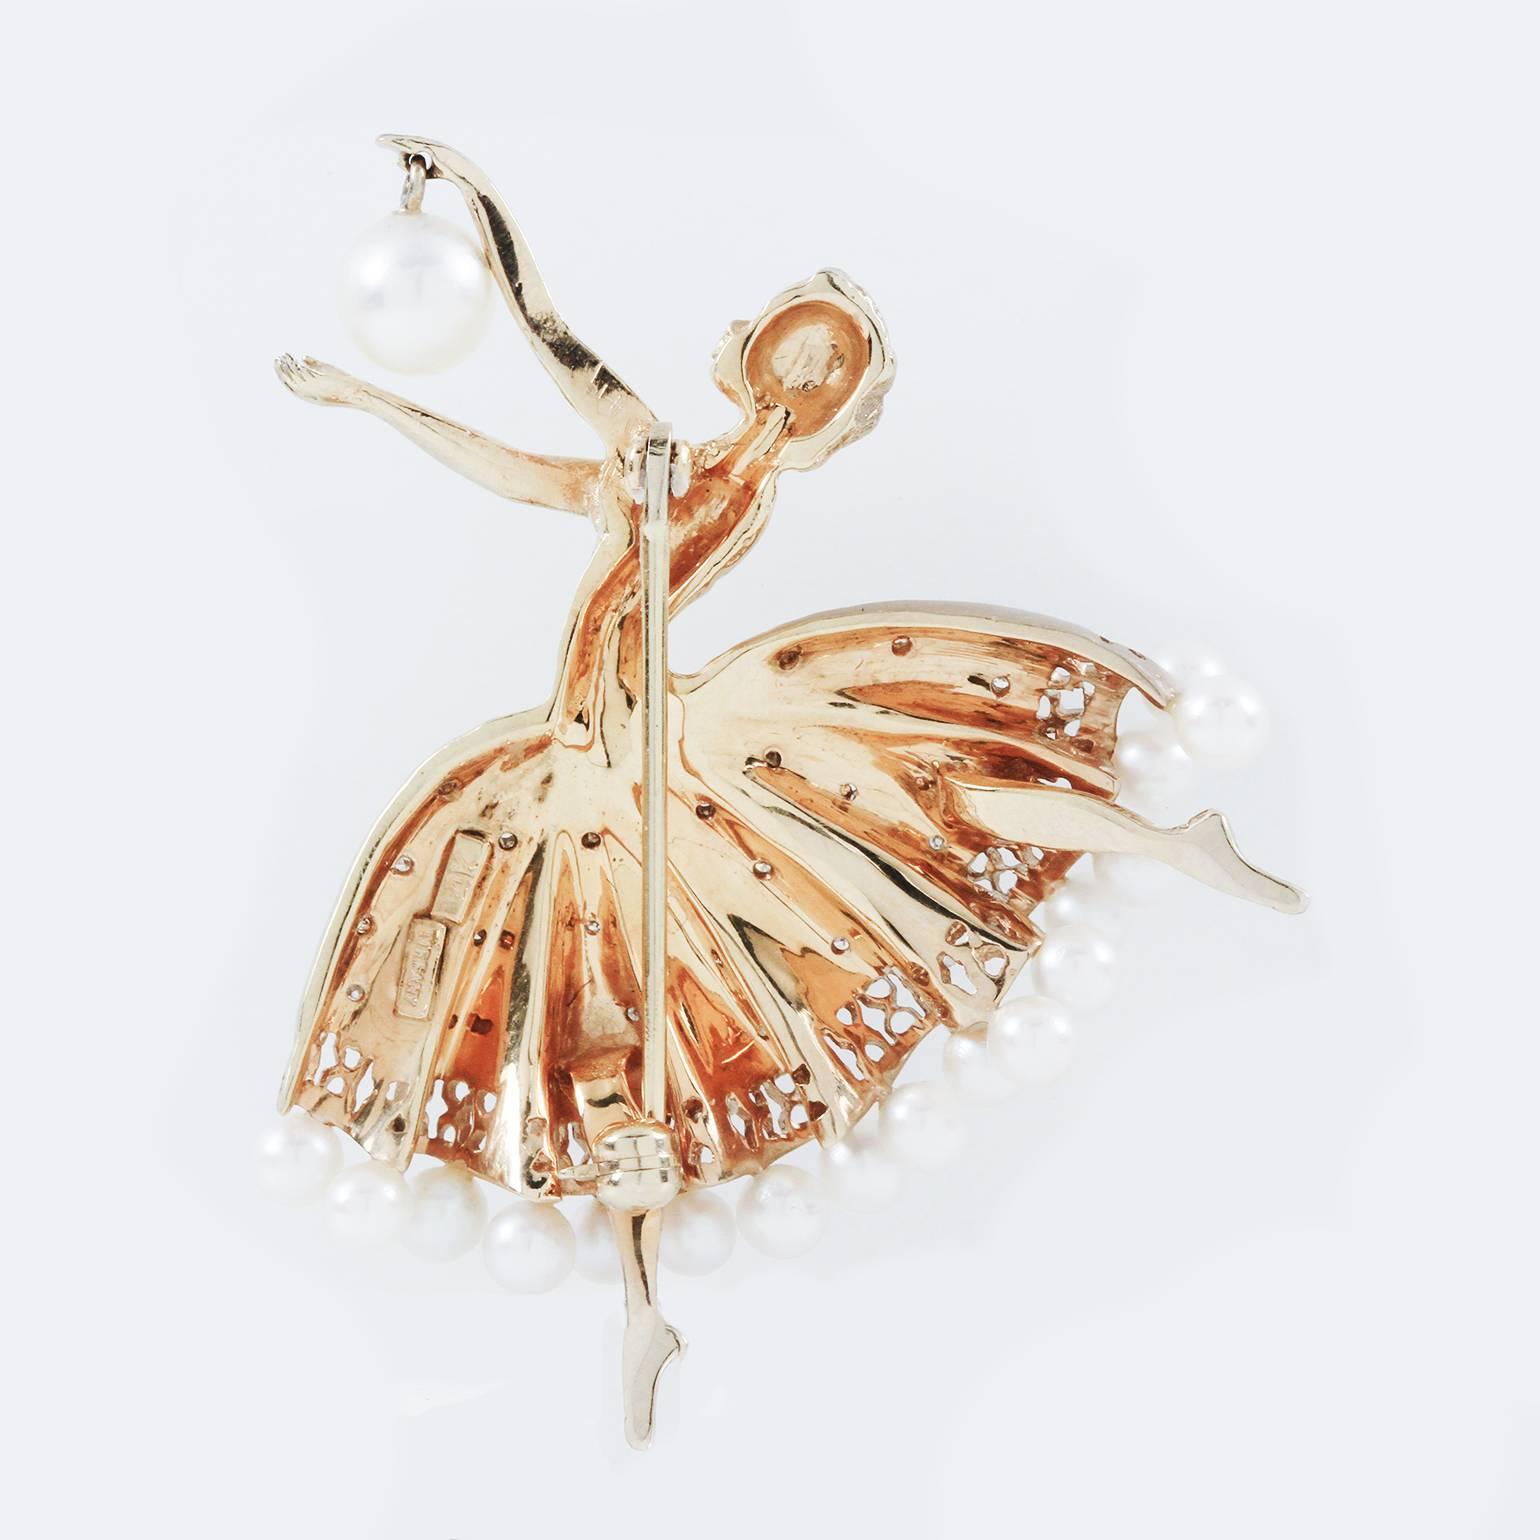  Gold, Cultured Pearl and Diamond Ballerina Brooch, Tiffany & Co. 
14 kt., pearls ap. 6.6 to 3.9 mm., signed Tiffany, ap. 11.2 dwts. 

C Property of a Lady

Condition Report: Overall in good condition, light wear to metal. 

Diamonds: